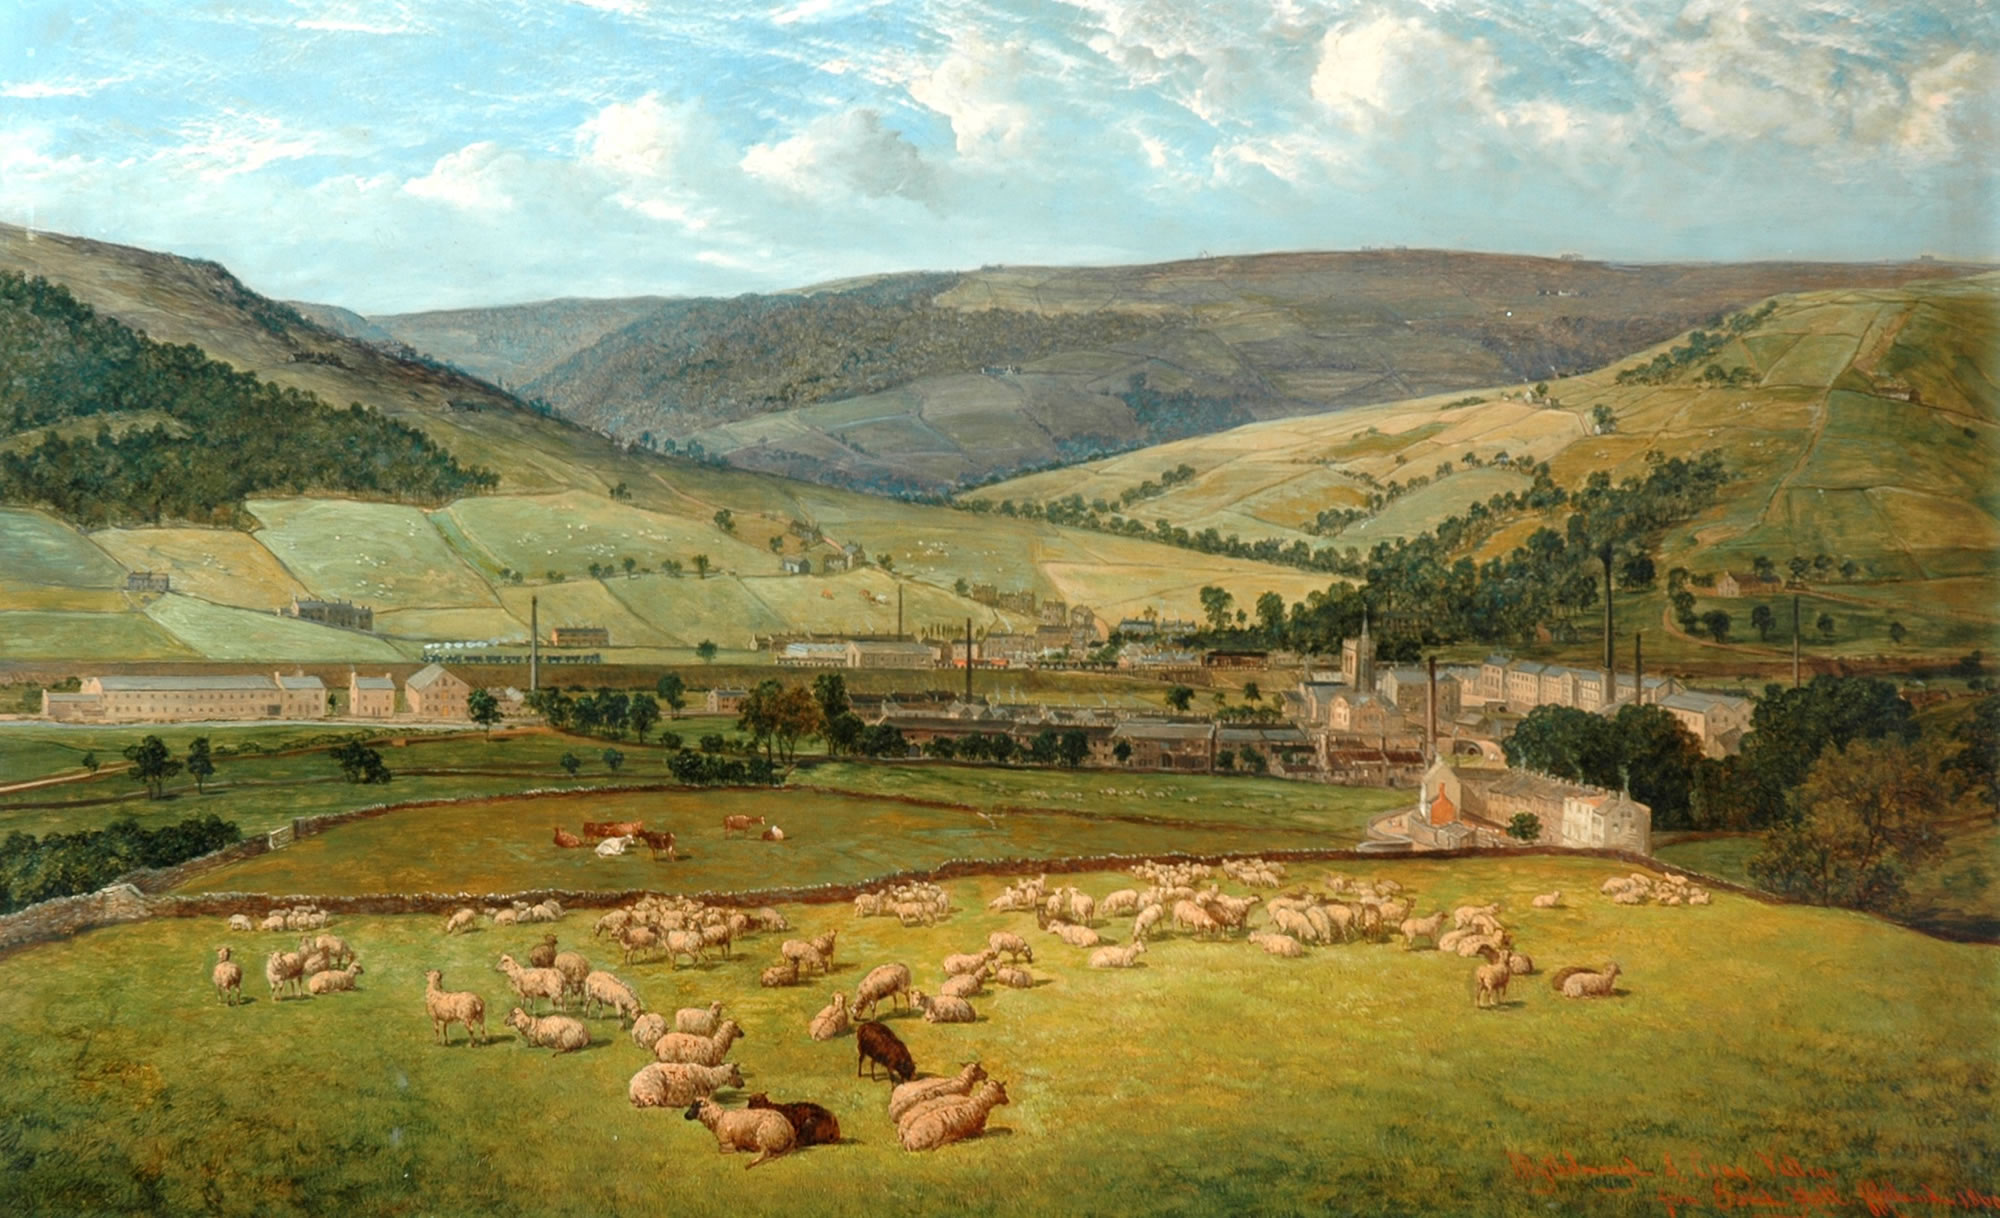 Image name calderdale mytholmroyd amd cragg valley from ewood hall john holland 1869 the 9 image from the post We are West Yorkshire in Yorkshire.com.